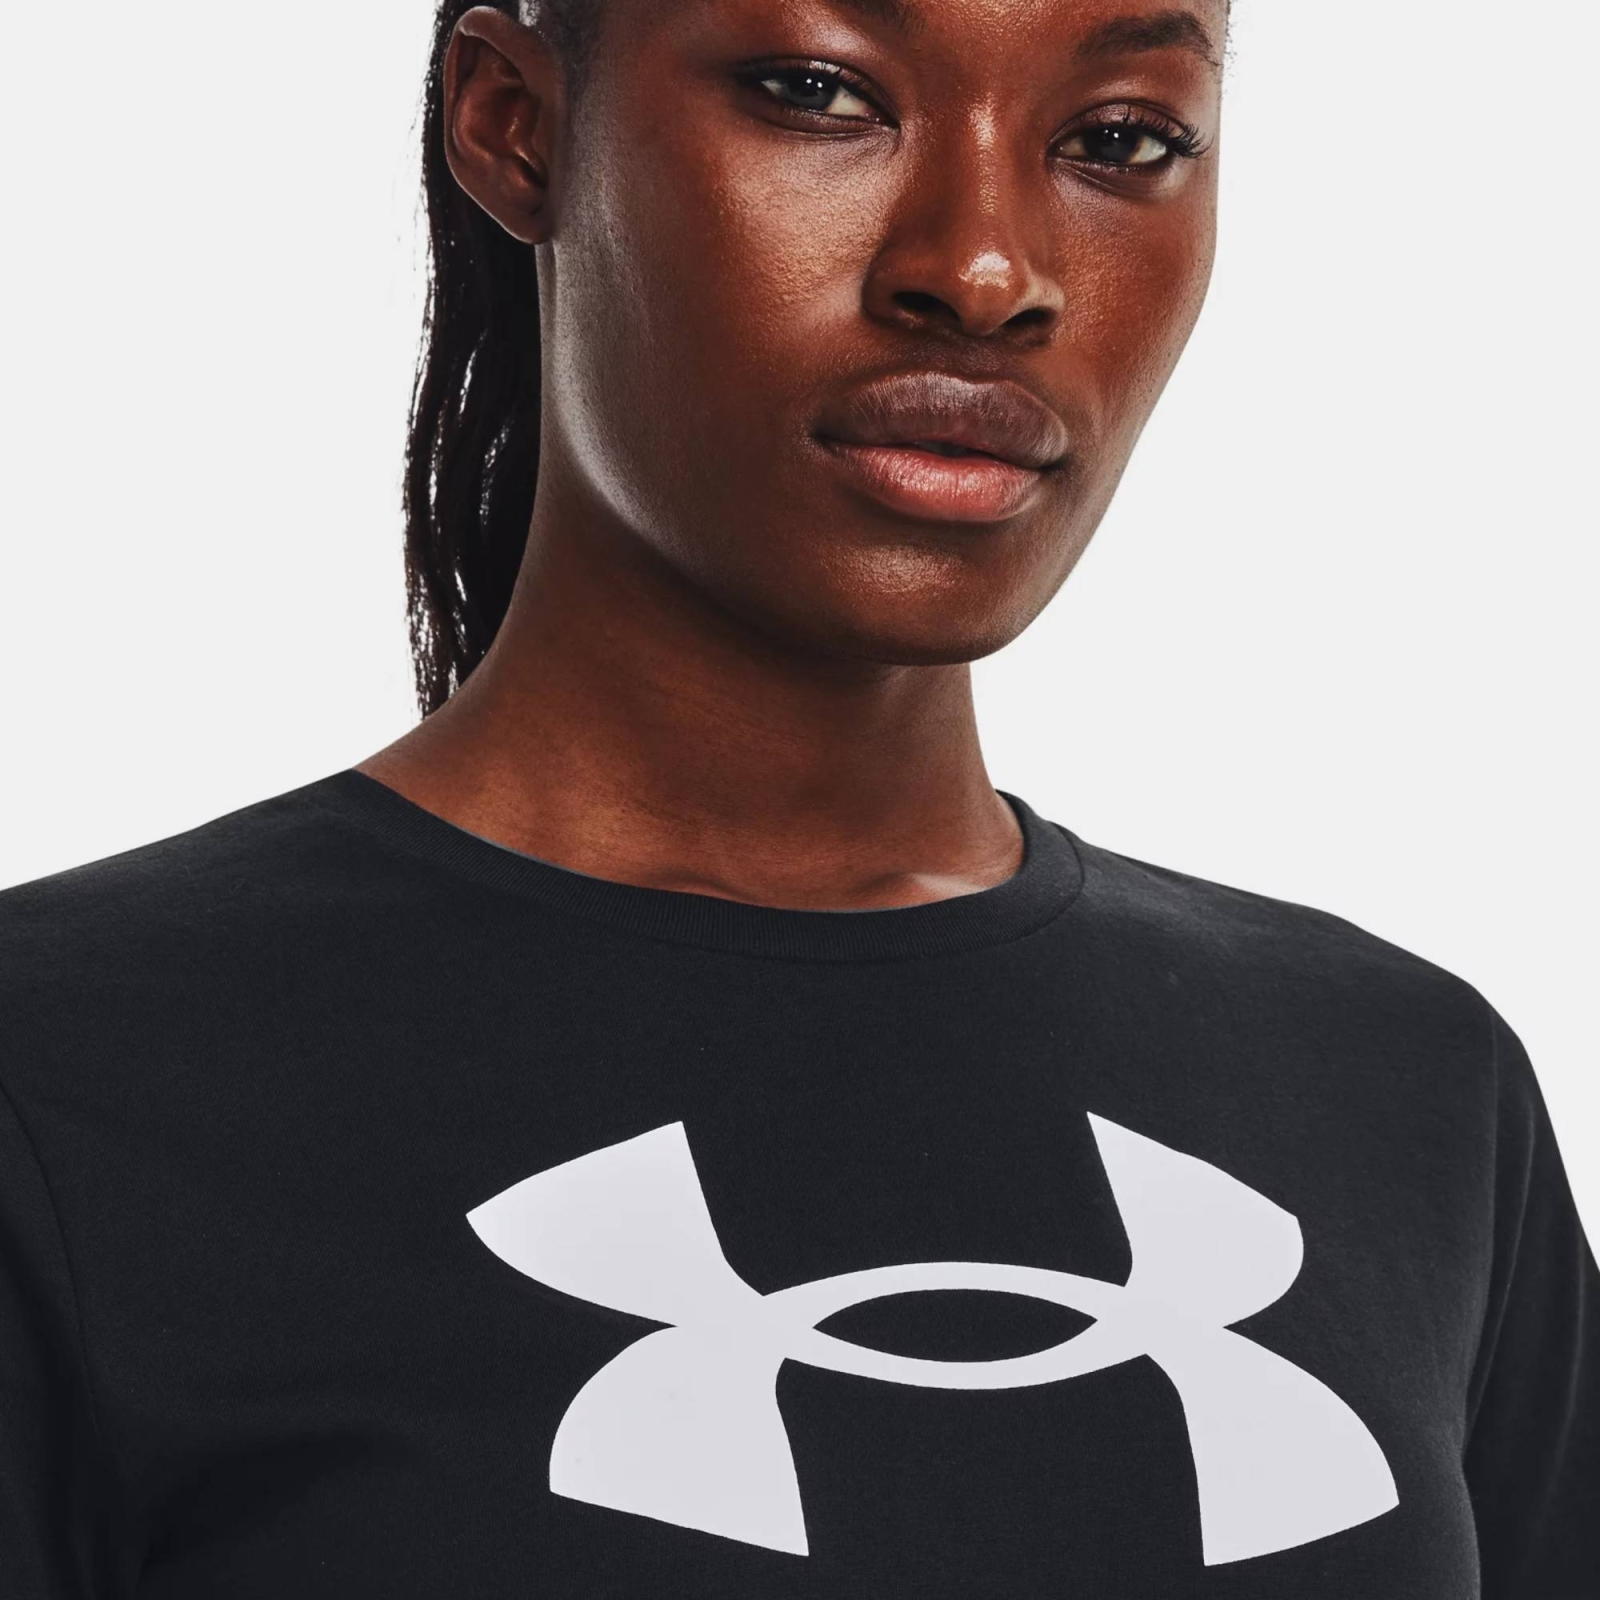 UNDER ARMOUR LIVE SPORTSTYLE GRAPHICC